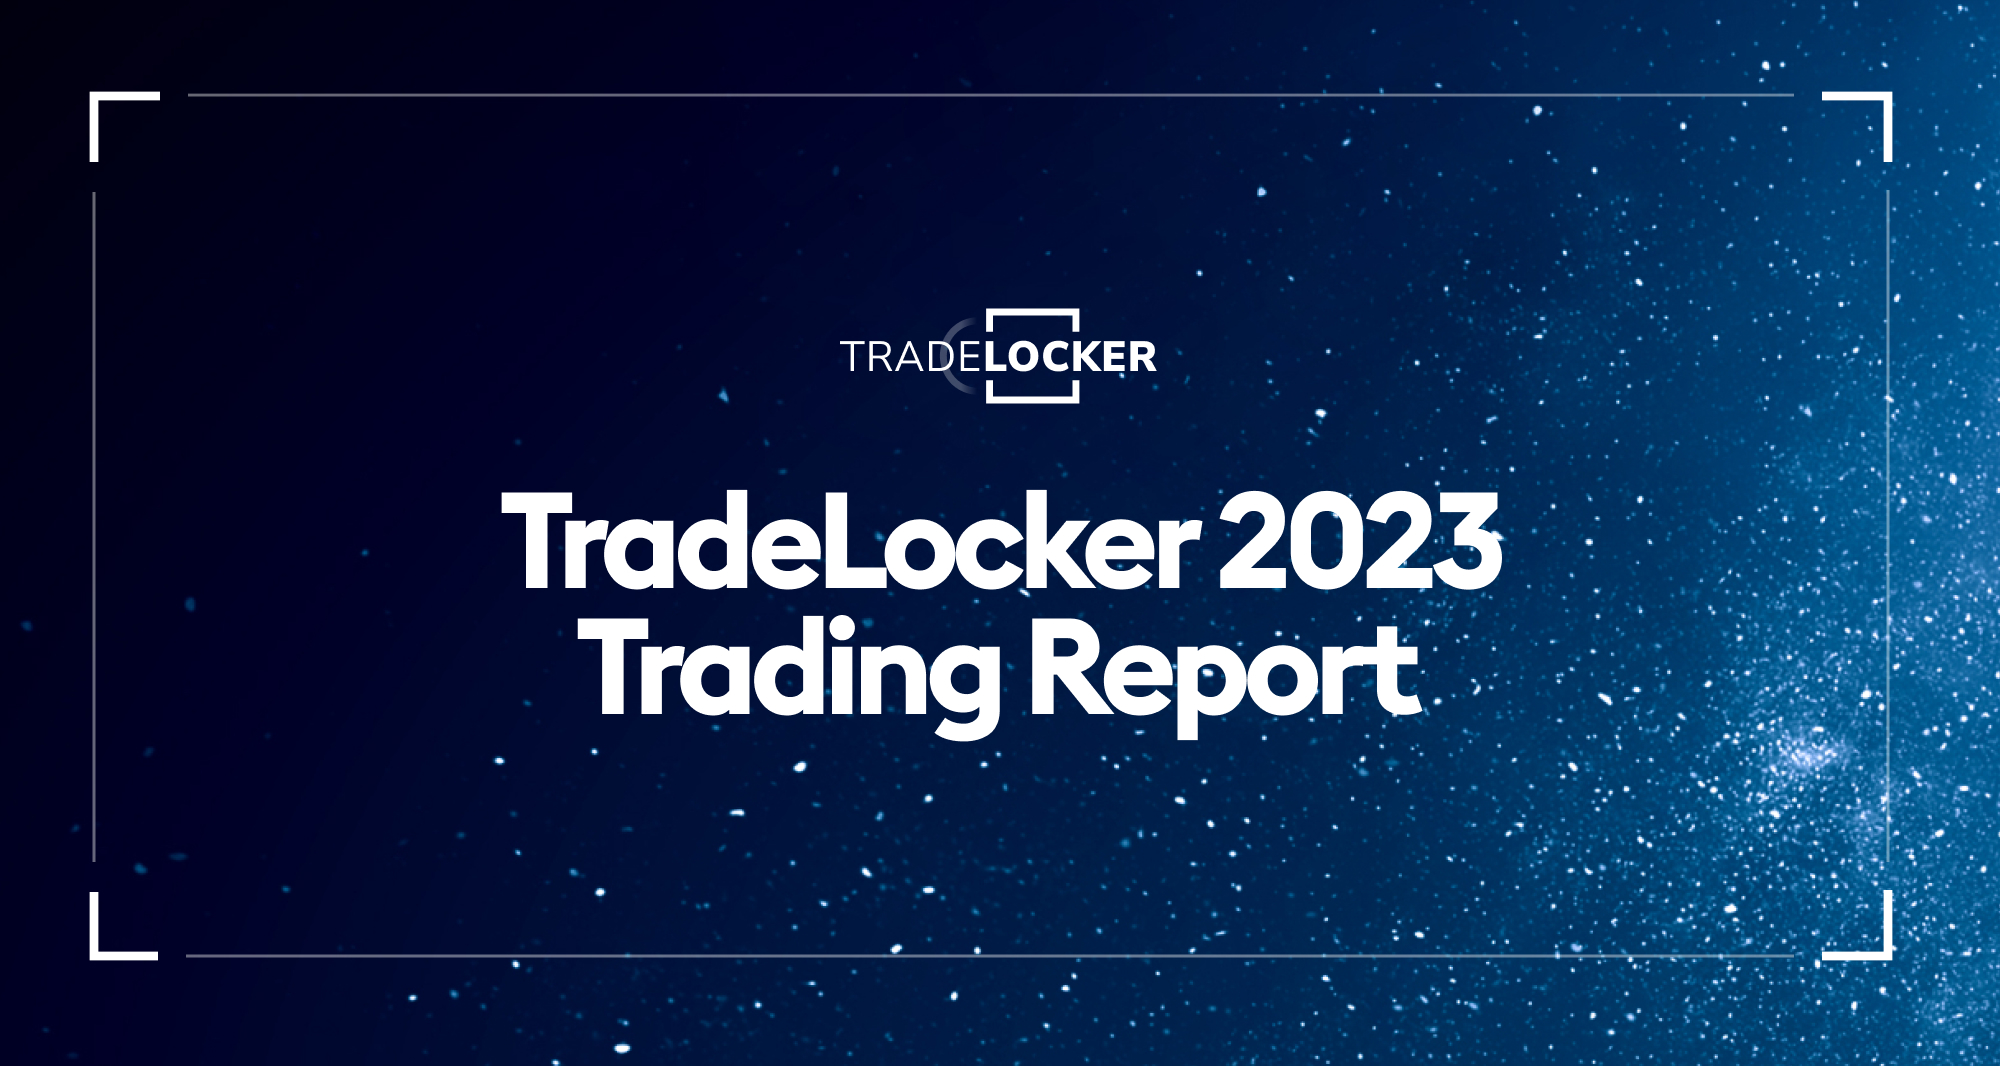 Trading Report 2023: Top Instruments and Key Highlights